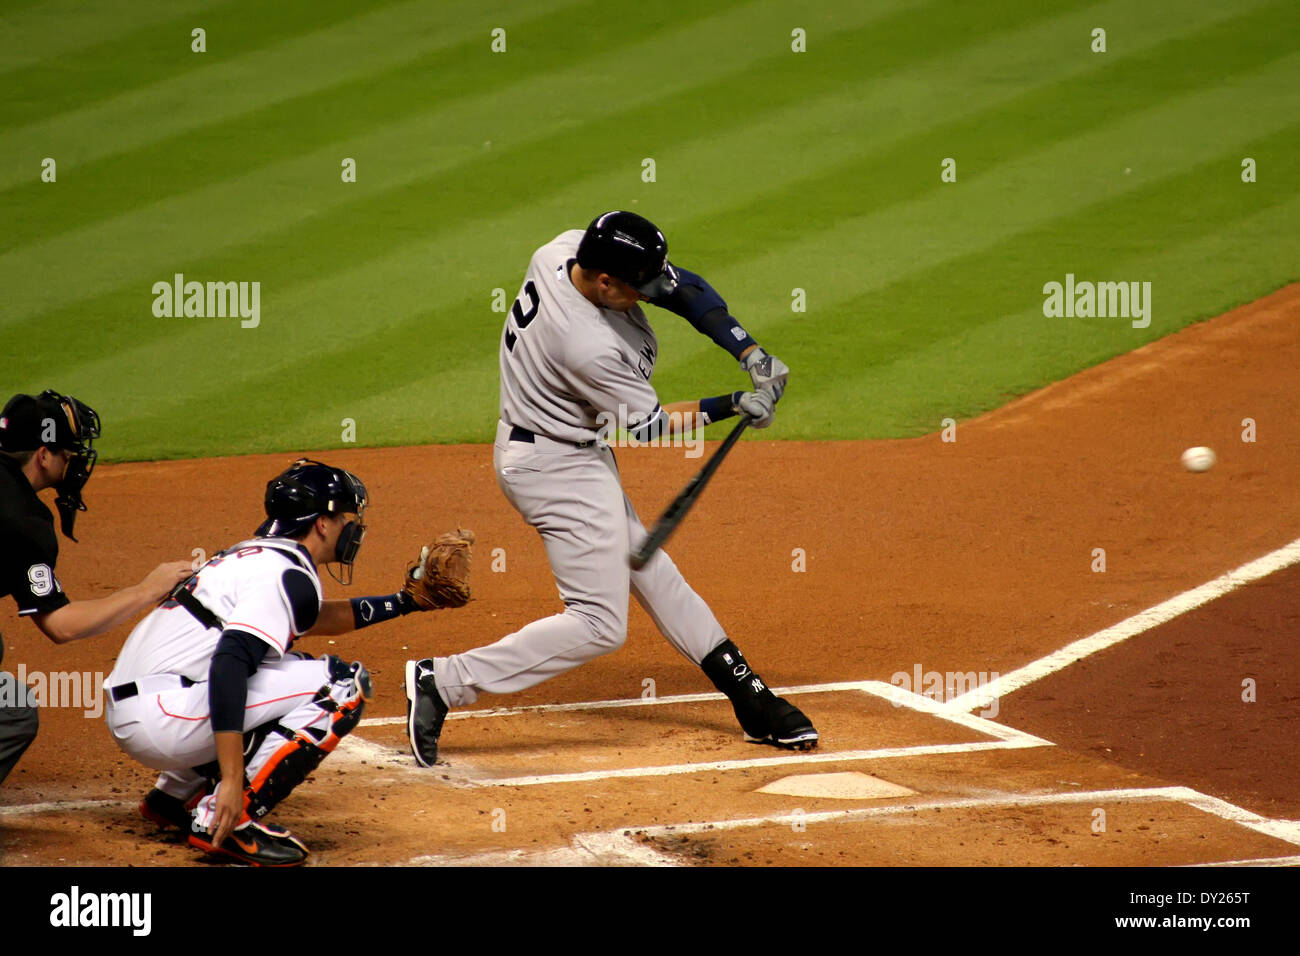 Houston, Texas, USA. 3rd Apr, 2014. APR 03 2014: New York Yankees shortstop Derek Jeter #2 swings at a pitch during the MLB baseball game between the Houston Astros and the New York Yankees from Minute Maid Park in Houston, TX. Credit:  csm/Alamy Live News Stock Photo